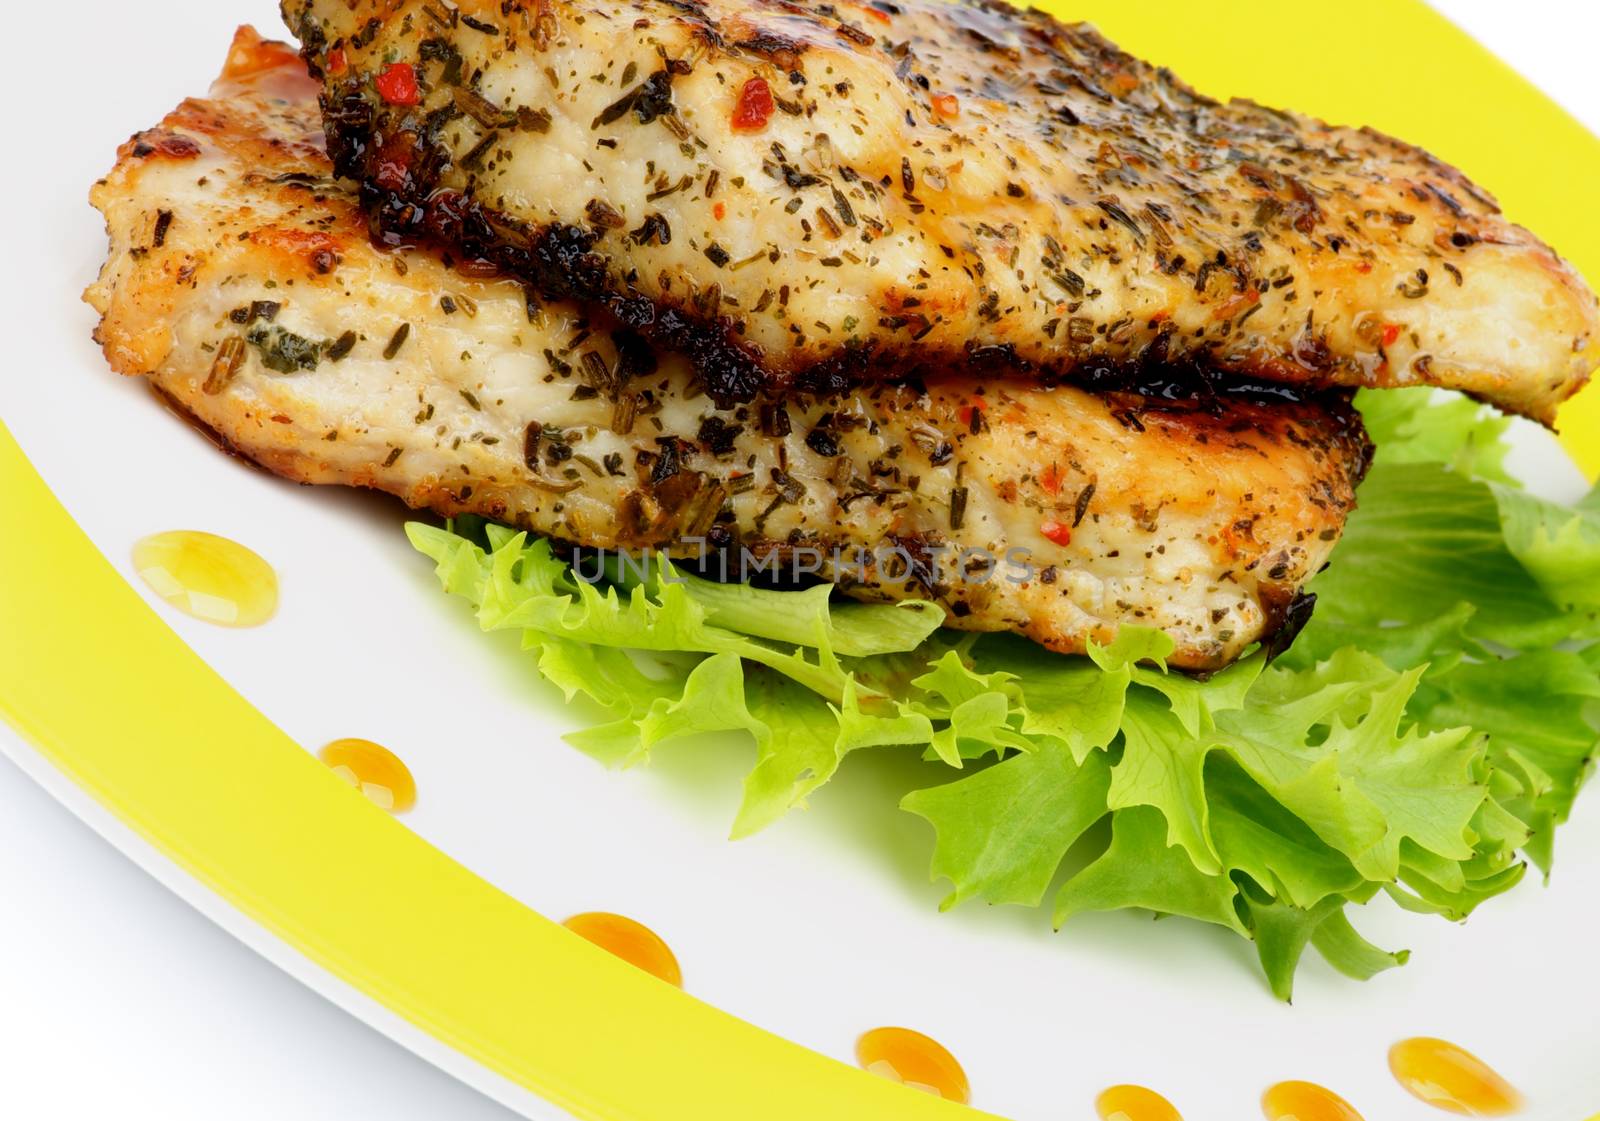 Roasted Chicken Fillets with Herbs, Lettuce and Honey Sauce on Yellow Plate closeup